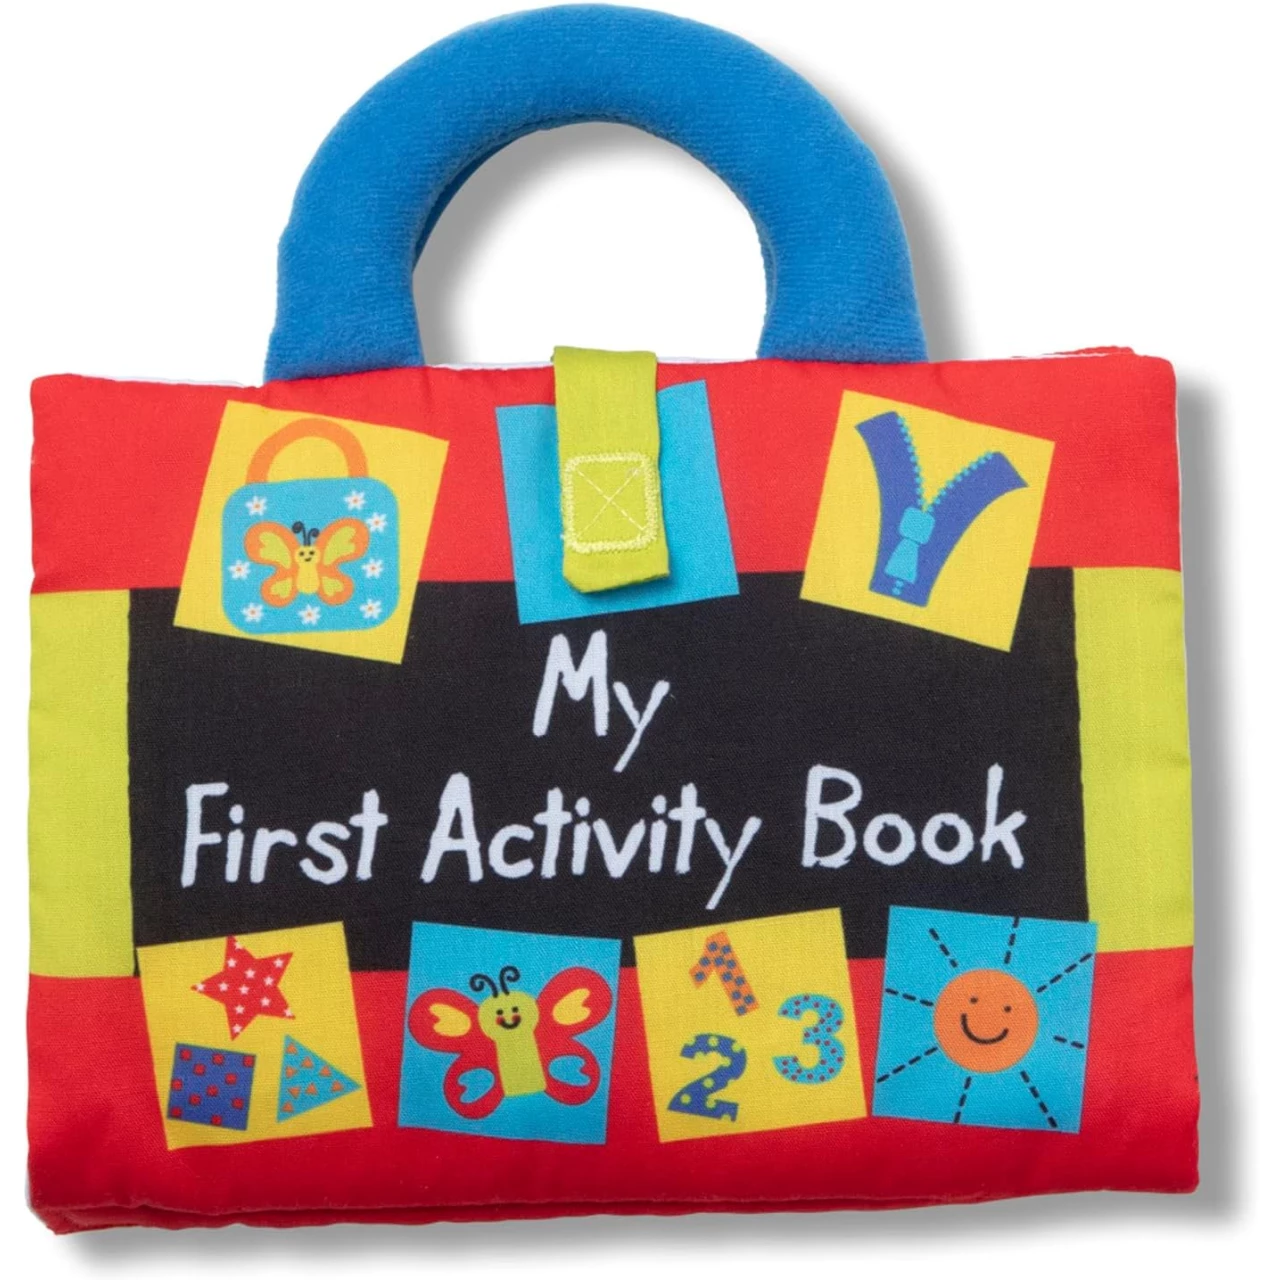 Melissa &amp; Doug K’s Kids My First Activity Book 8-Page Soft Book for Babies and Toddlers - Early Learning Developmental Plush Soft Activity Book